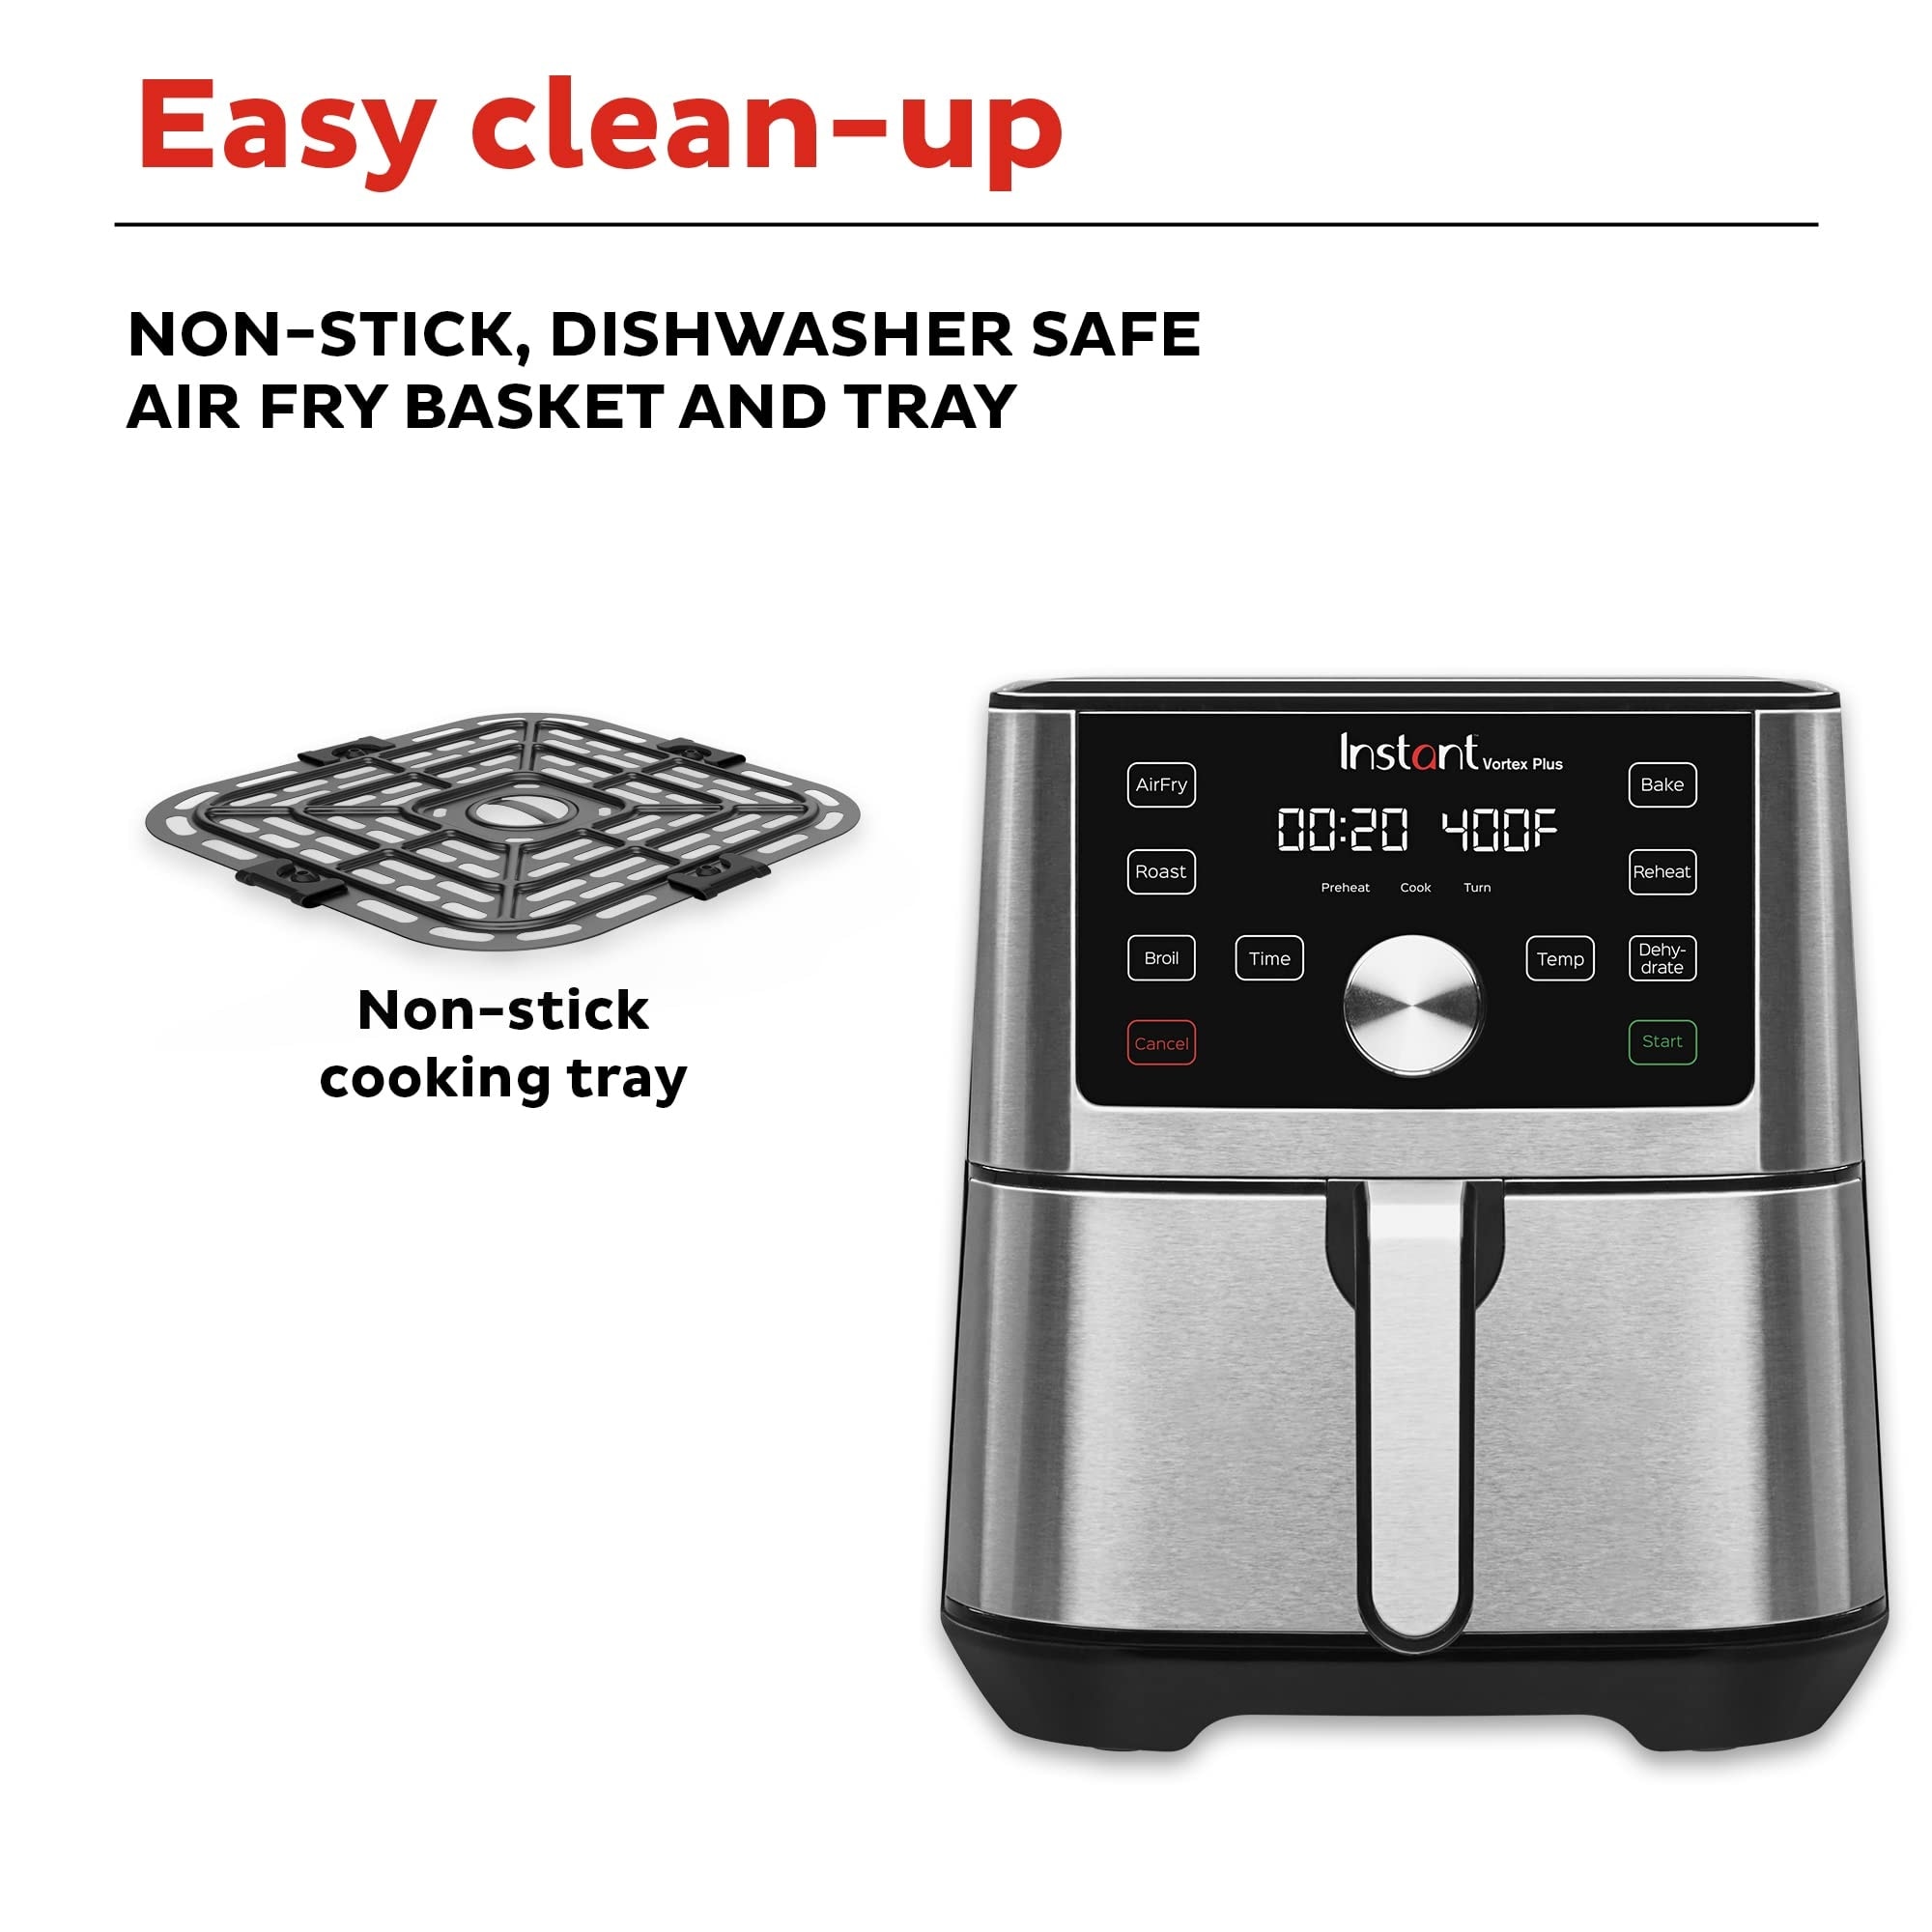 https://ak1.ostkcdn.com/images/products/is/images/direct/a72632d7fc61c42bdc7664077b9d00565a8dcb67/Air-Fryer-Oven%2C-6-Quart%2C-From-the-Makers-of-Pot%2C-6-in-1%2C-Broil%2C-Roast%2C-Dehydrate%2C-Bake%2C-Non-stick-and-Dishwasher-Safe-Basket.jpg